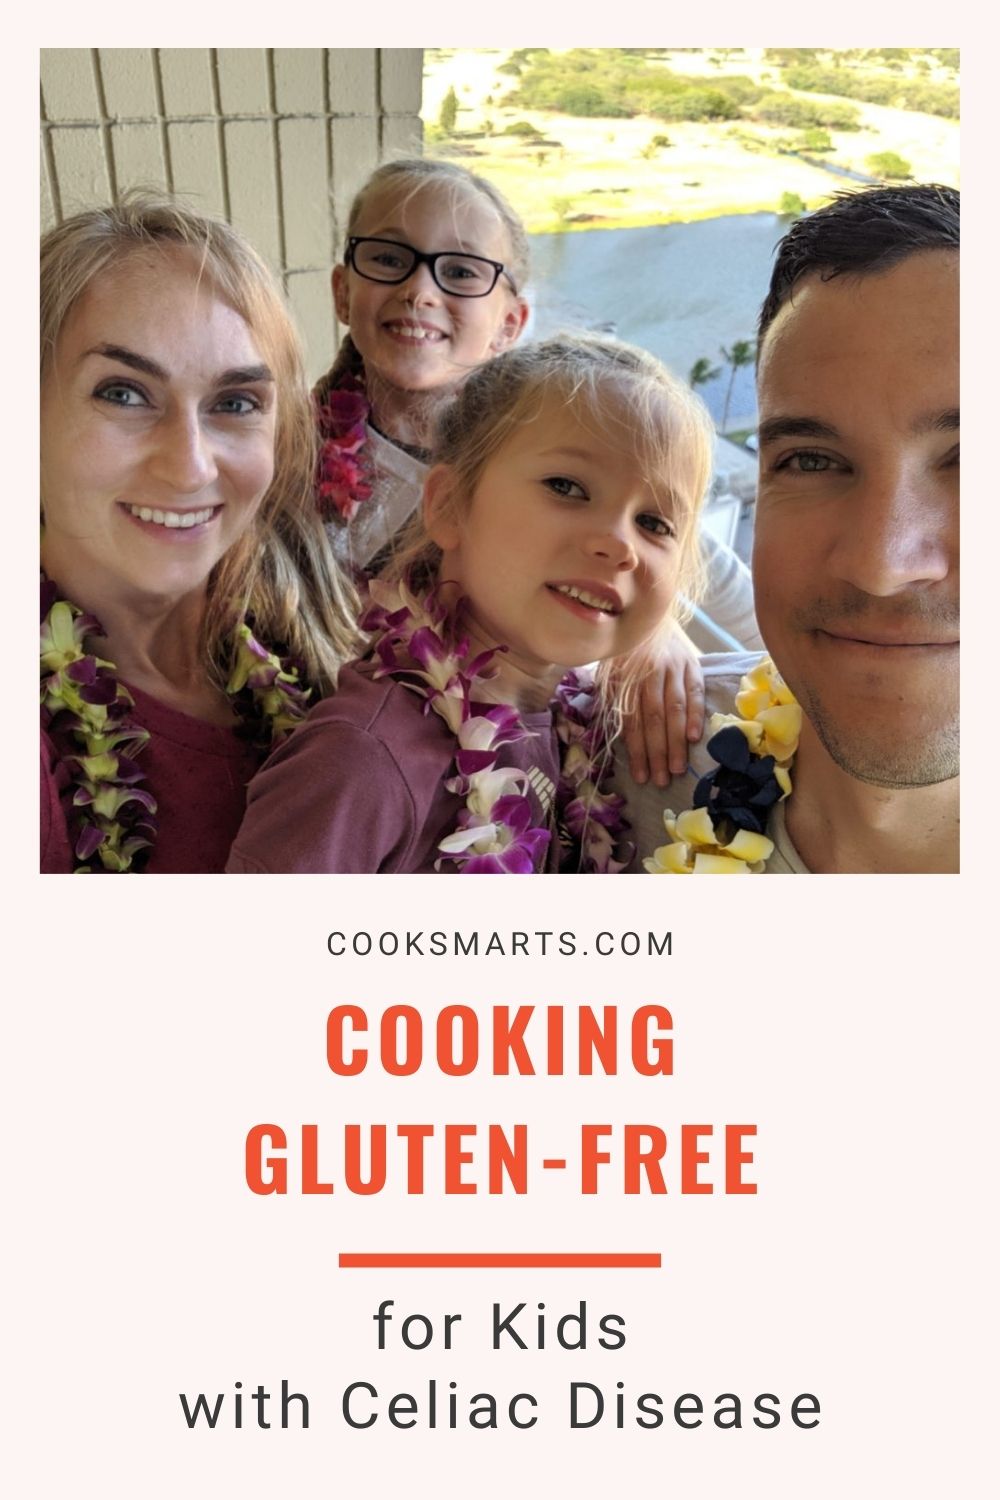 Catherine: Cooking Gluten-Free for Kids with Celiac Disease | Cook Smarts Kitchen Hero